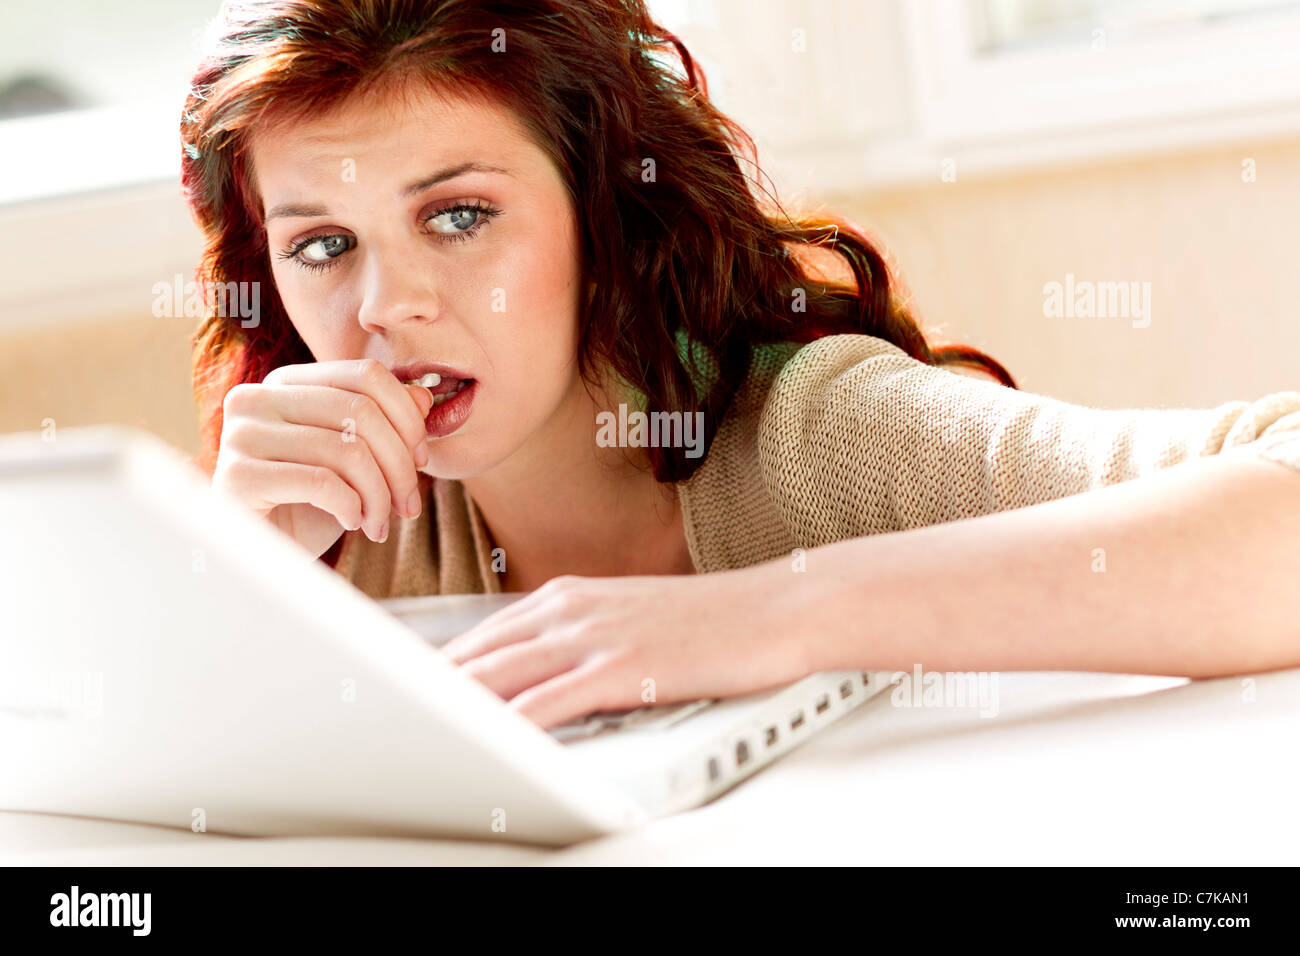 Girl looking thoughtful using laptop Stock Photo